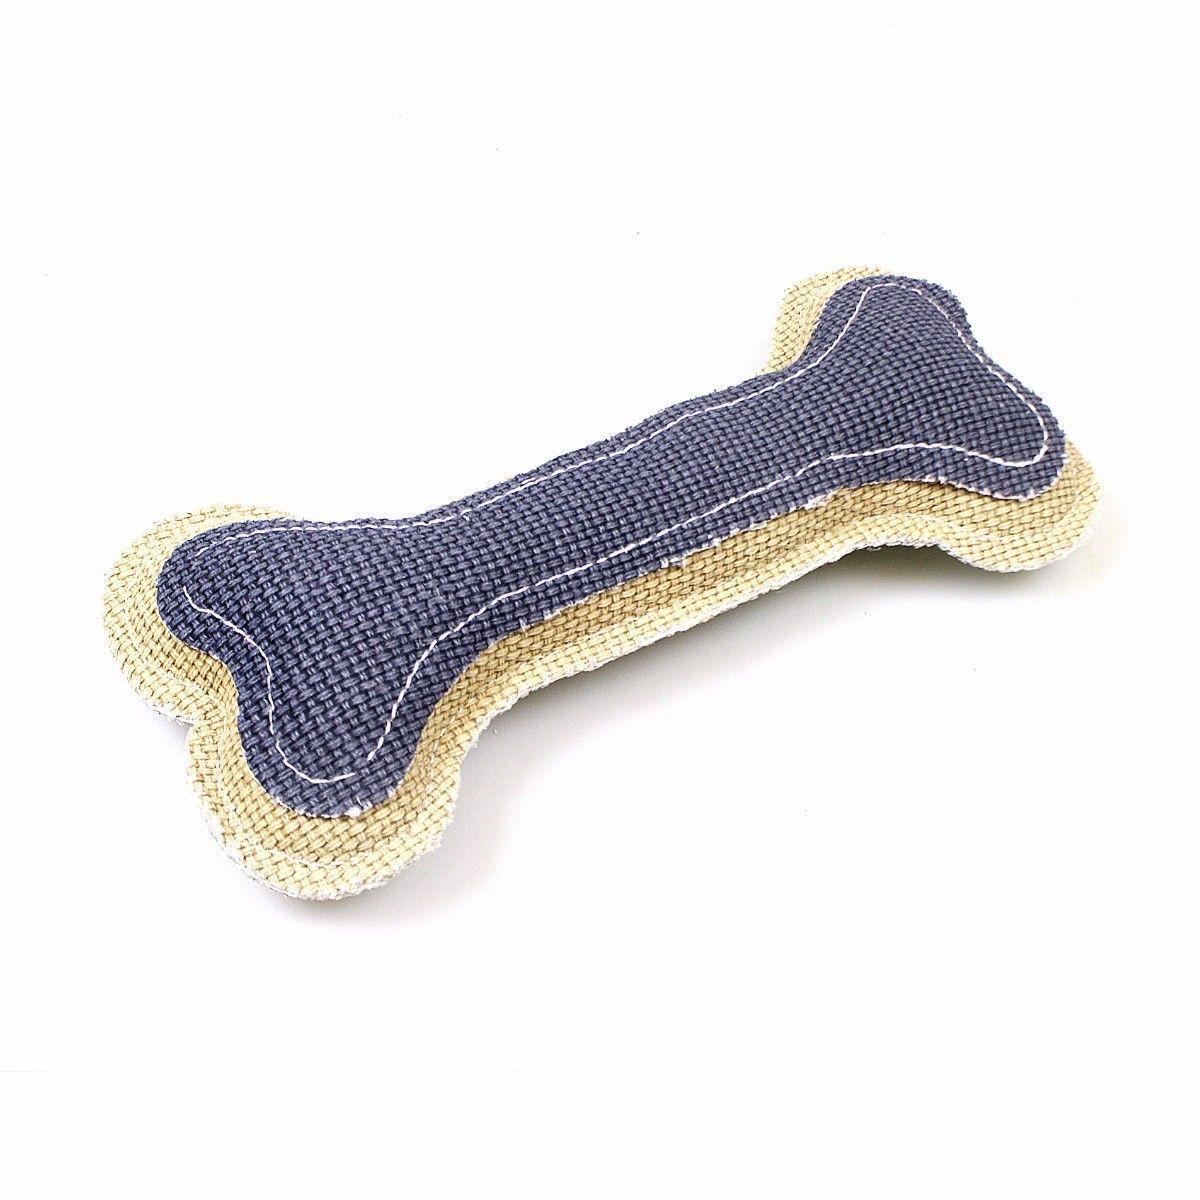 Dogs Bone Pet Fabric Teething Toy Approx 13cm 4198 (Parcel Rate)